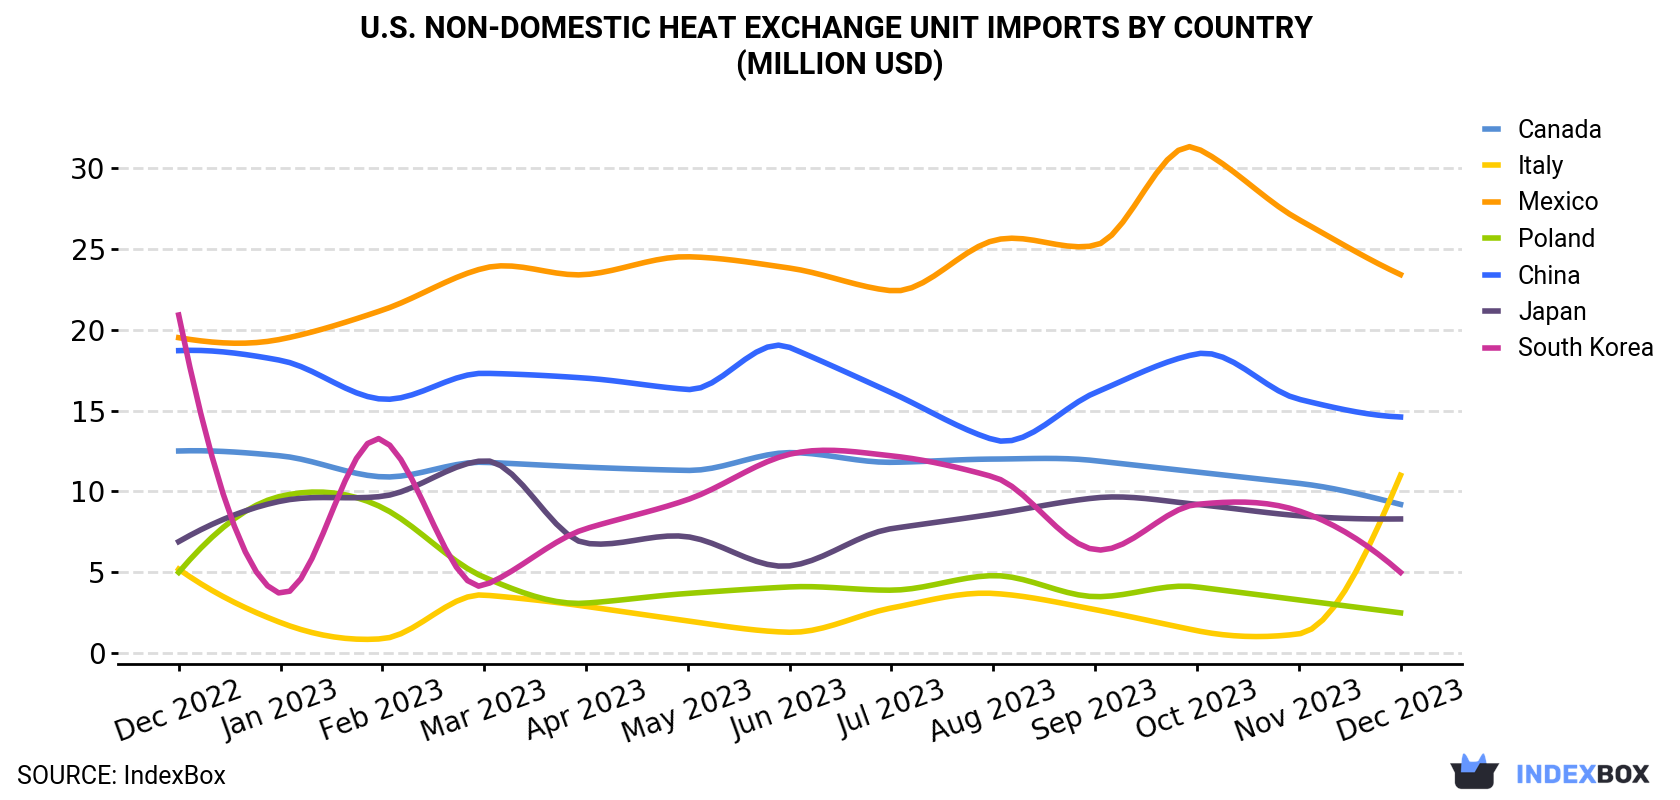 U.S. Non-Domestic Heat Exchange Unit Imports By Country (Million USD)